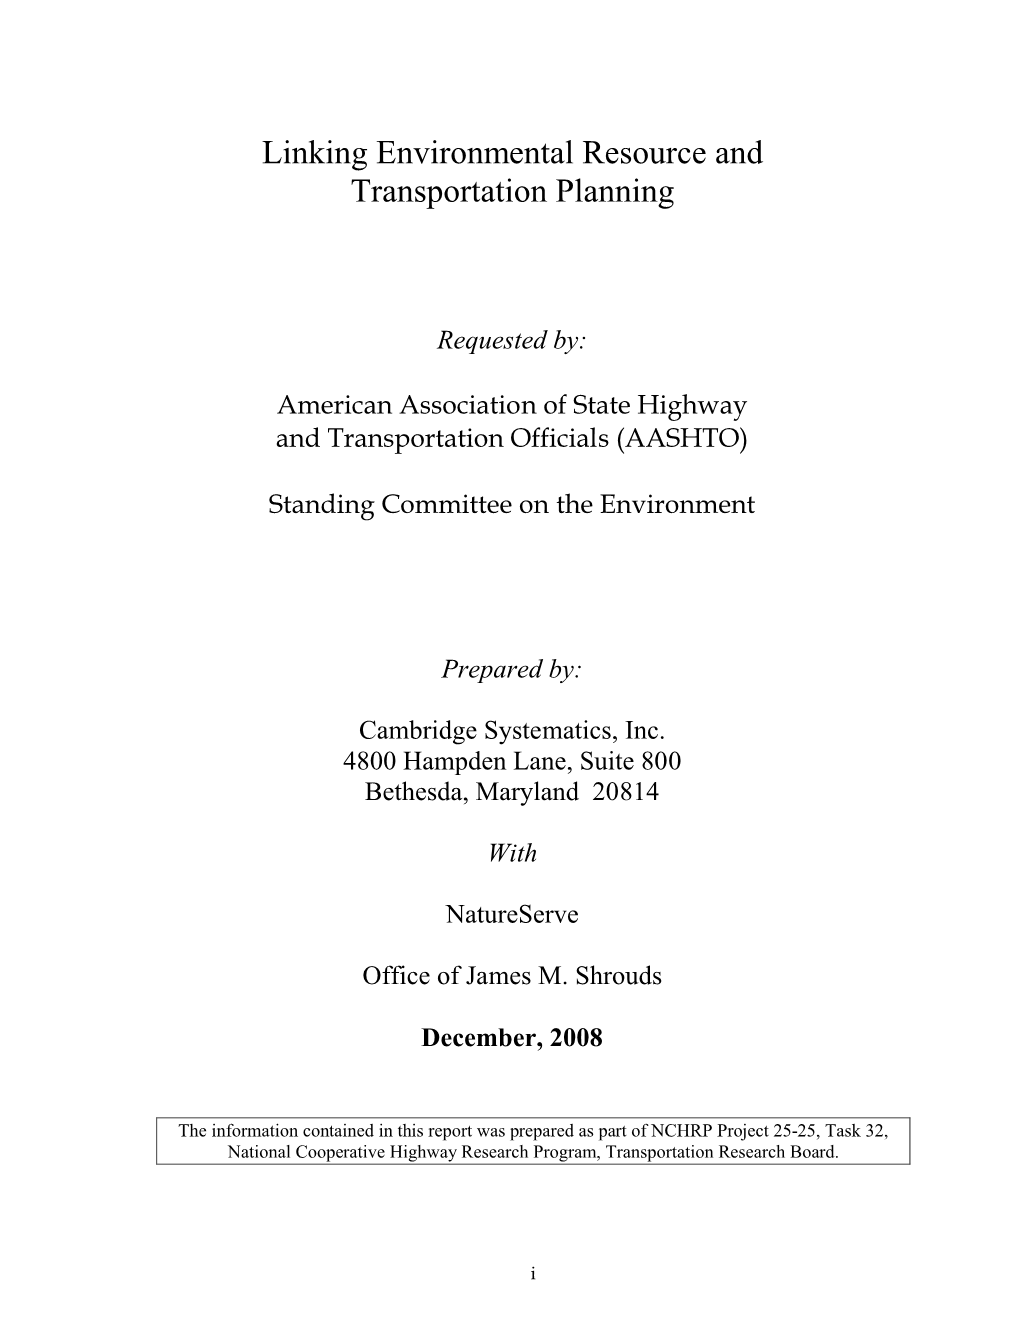 Linking Environmental Resource and Transportation Planning